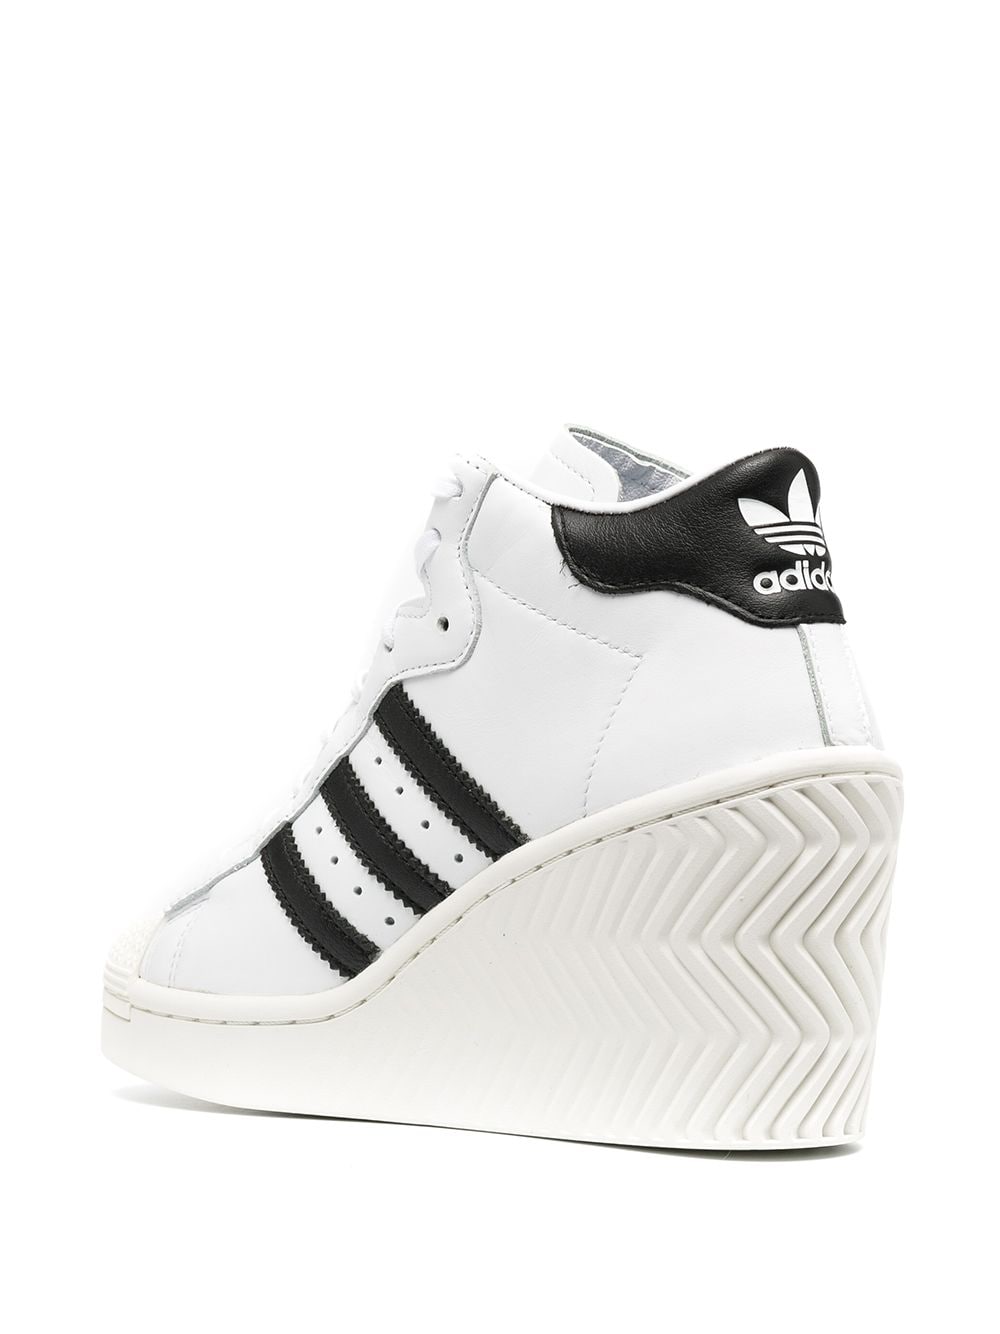 systematisch kwaad Darts Adidas Heeled lace-up Trainers - Farfetch